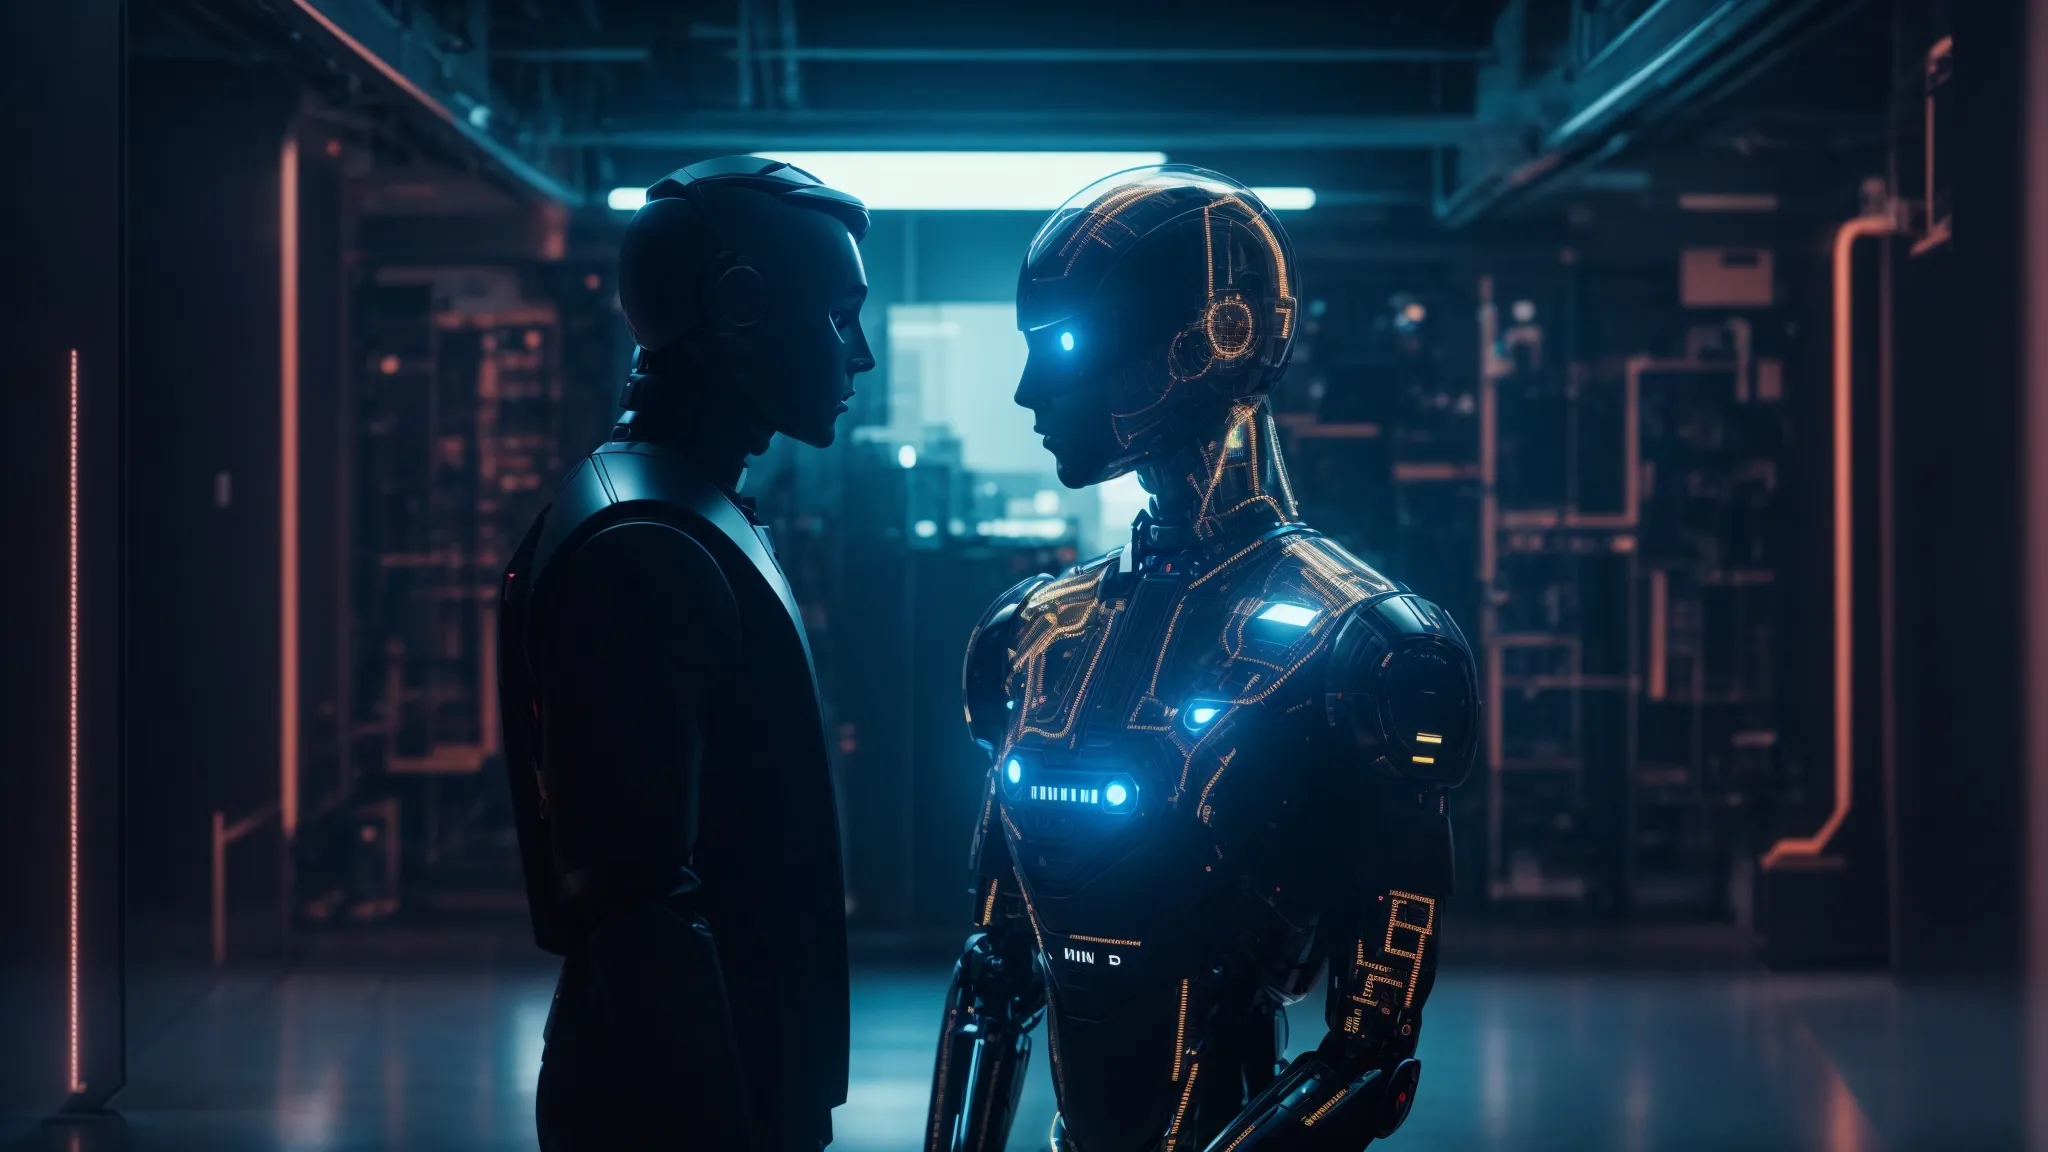 a conceptual image of a humanoid robot and a human silhouette facing each other with a digital interface of data flow in the background.